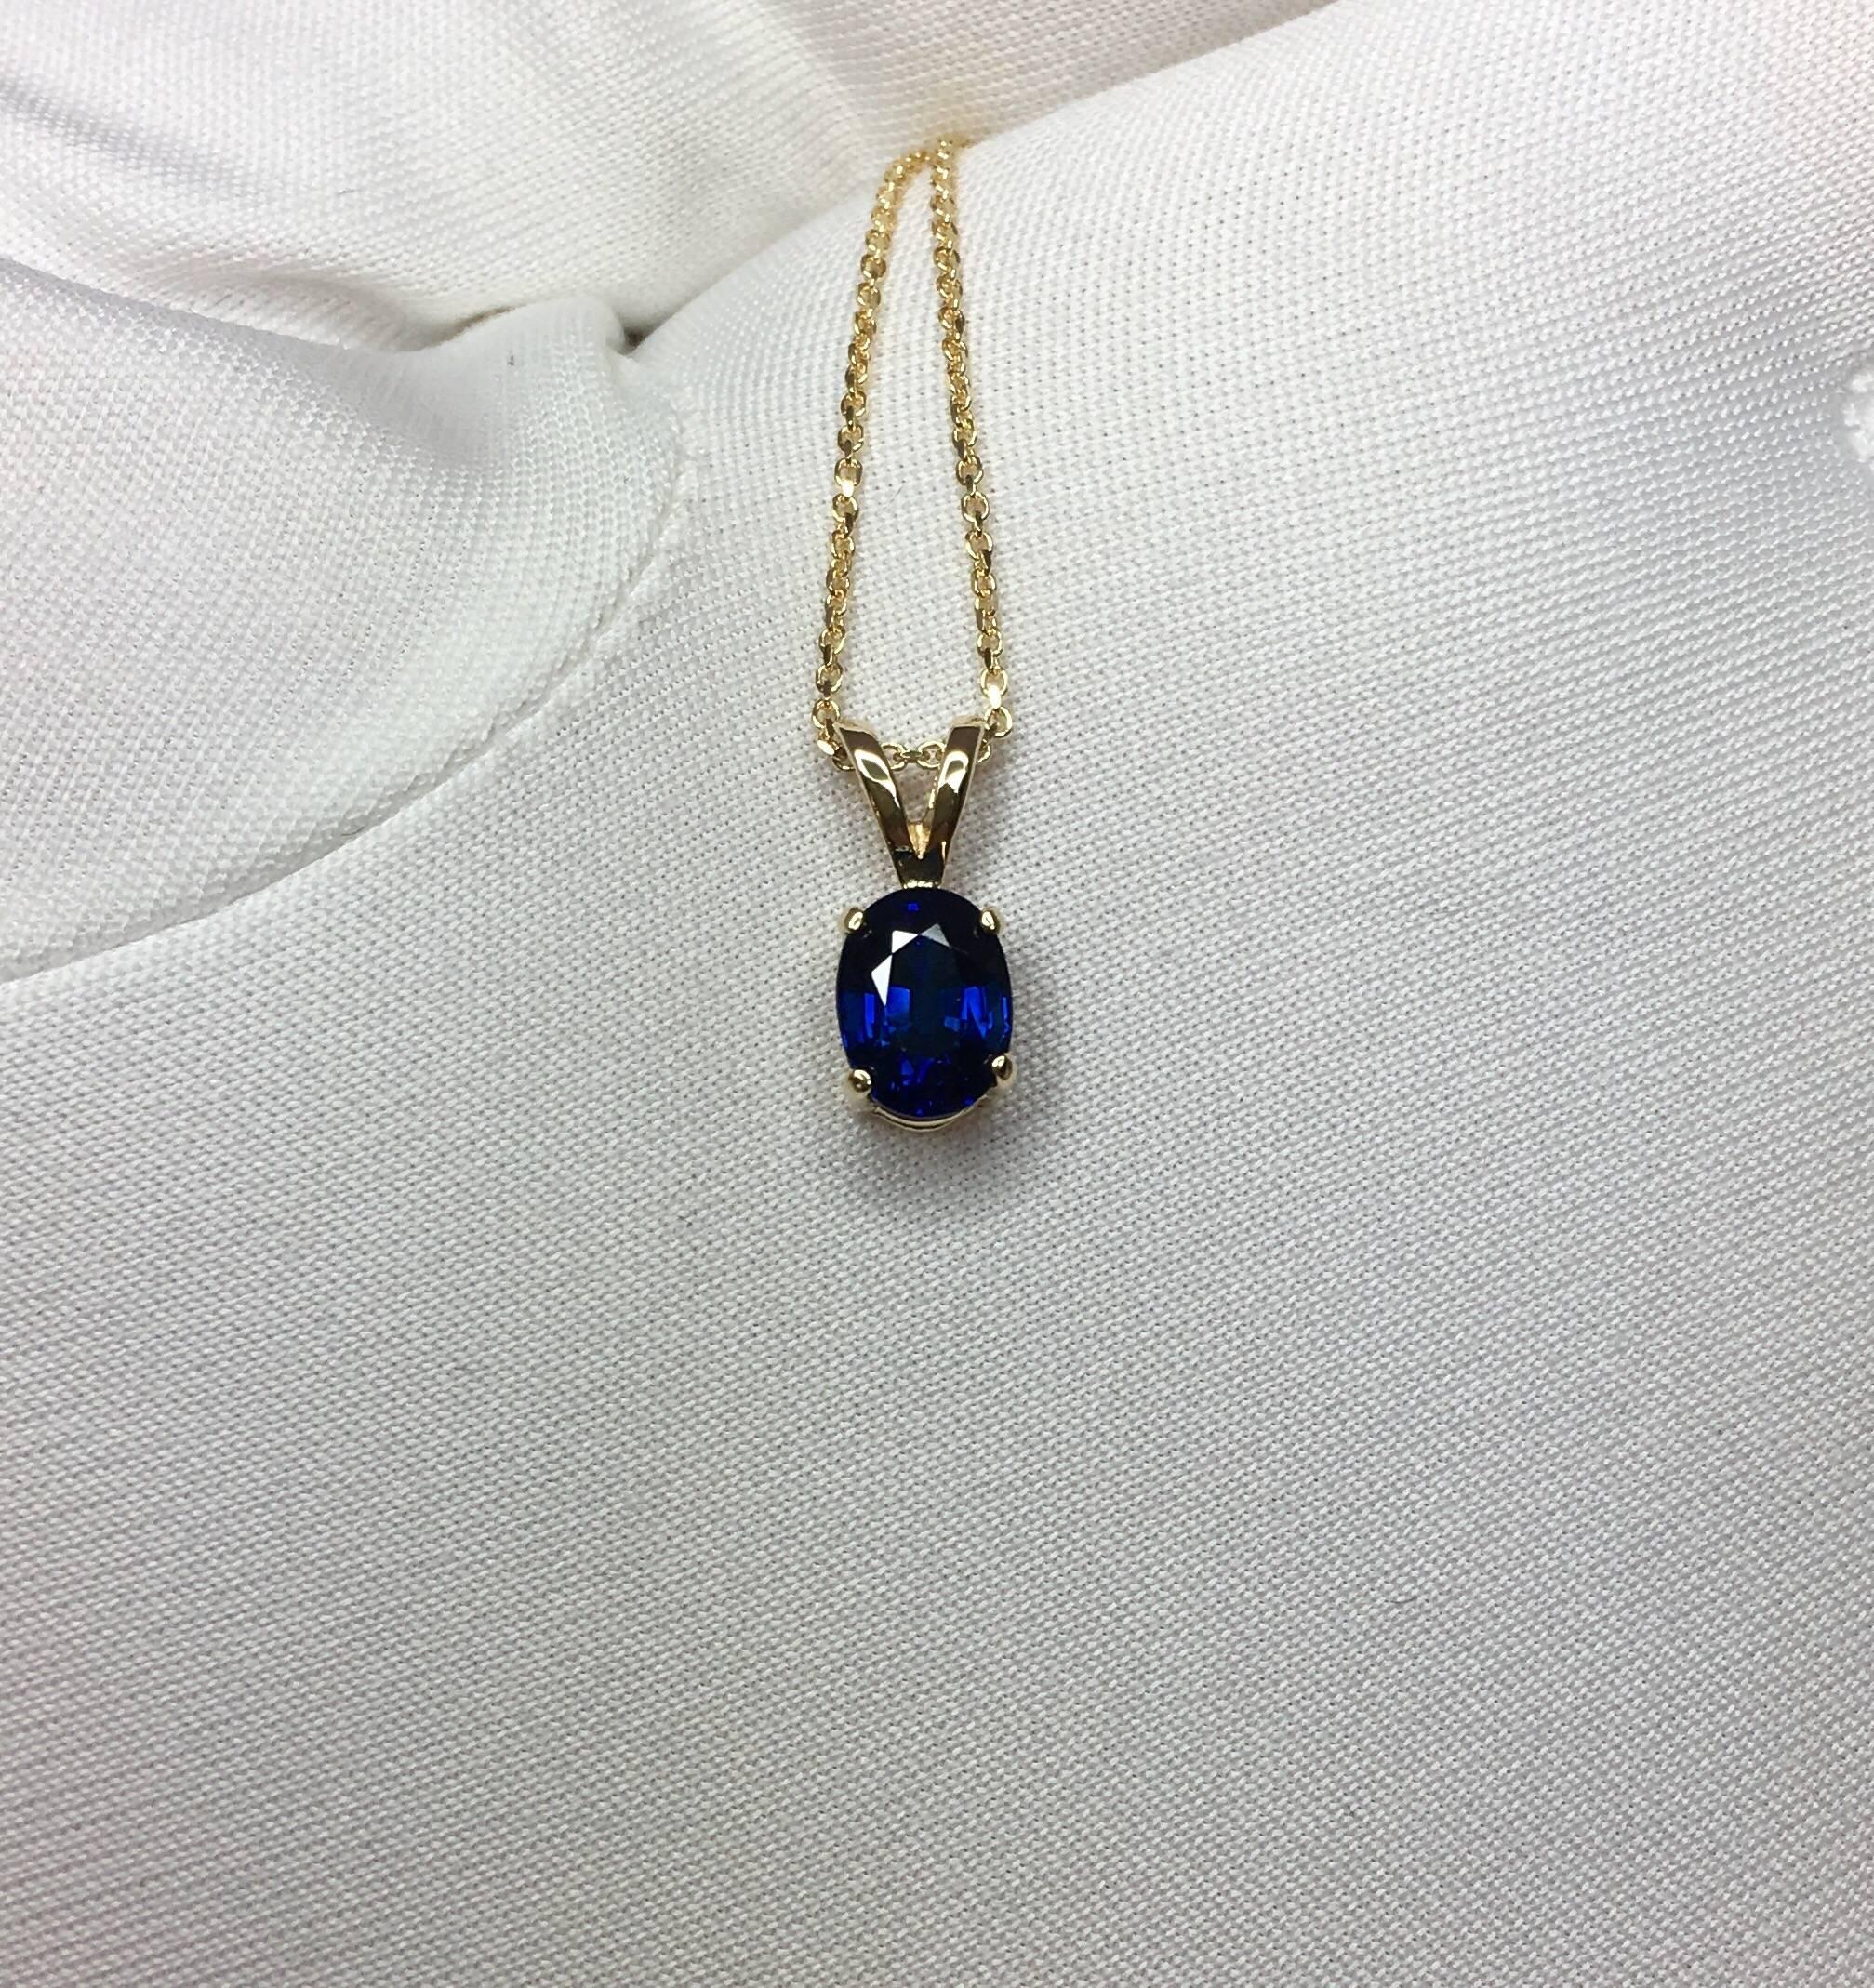 Beautiful natural 1.04 carat deep blue Sapphire set in a fine 14k yellow gold solitaire pendant.

Stunning blue sapphire with fine deep blue colour and excellent clarity.

It also has an excellent oval cut which shows lots of brightness and light